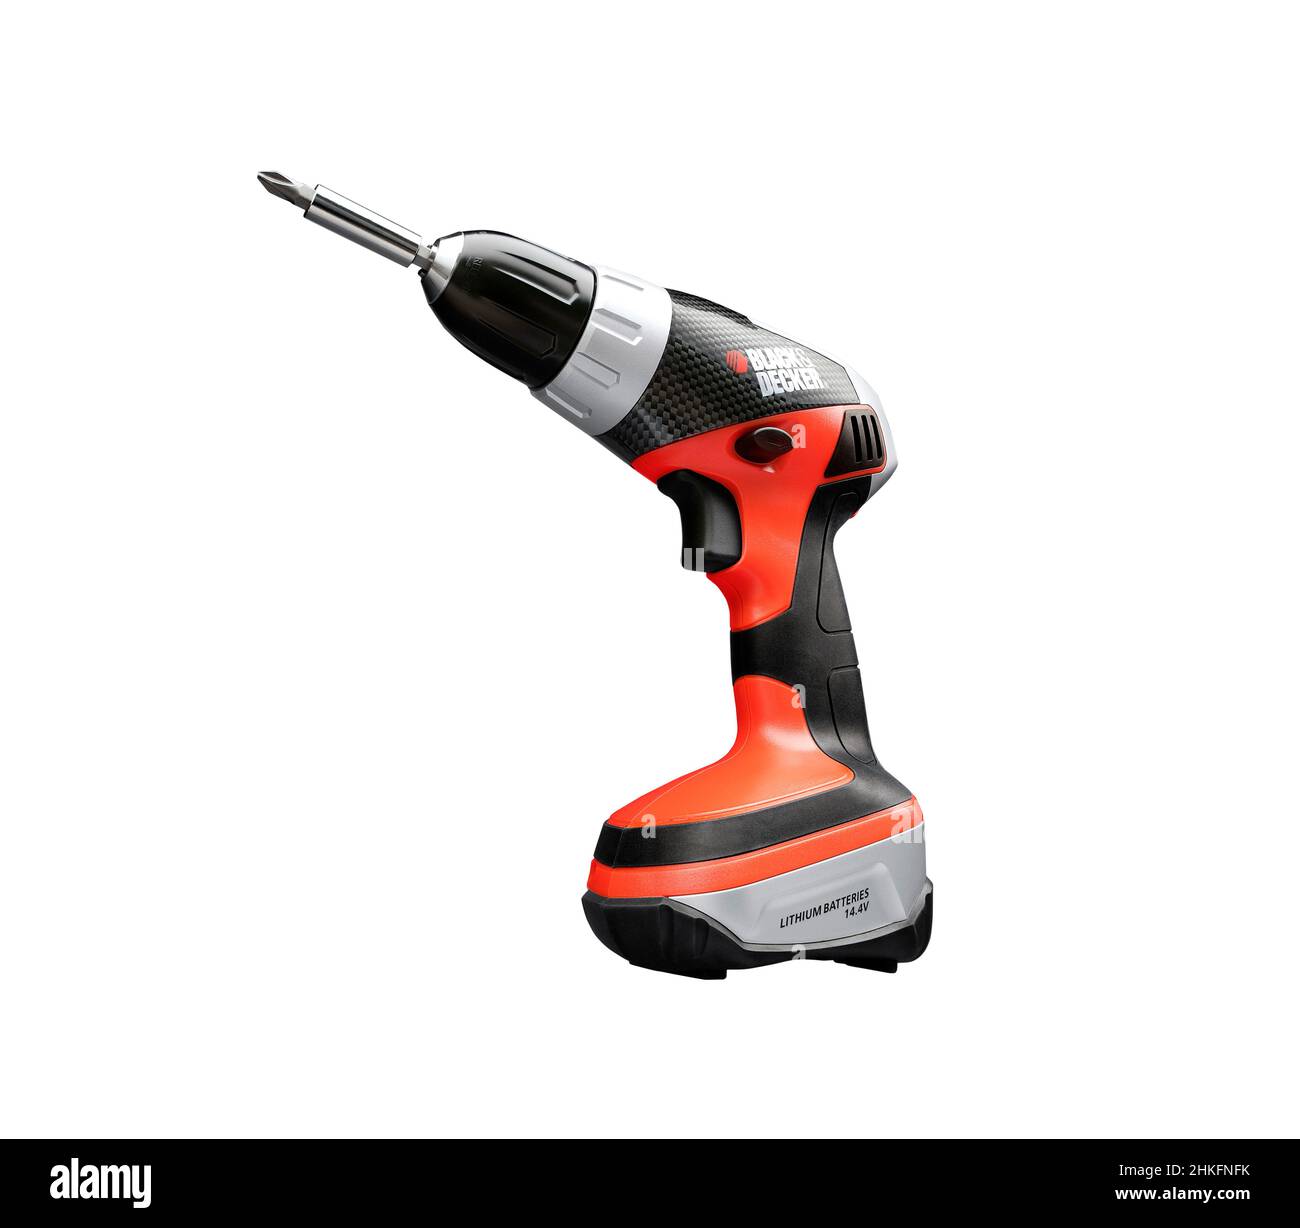 https://c8.alamy.com/comp/2HKFNFK/netherlands-haarlem-10-09-2008-black-and-decker-drill-in-a-studio-setting-isolated-on-white-2HKFNFK.jpg